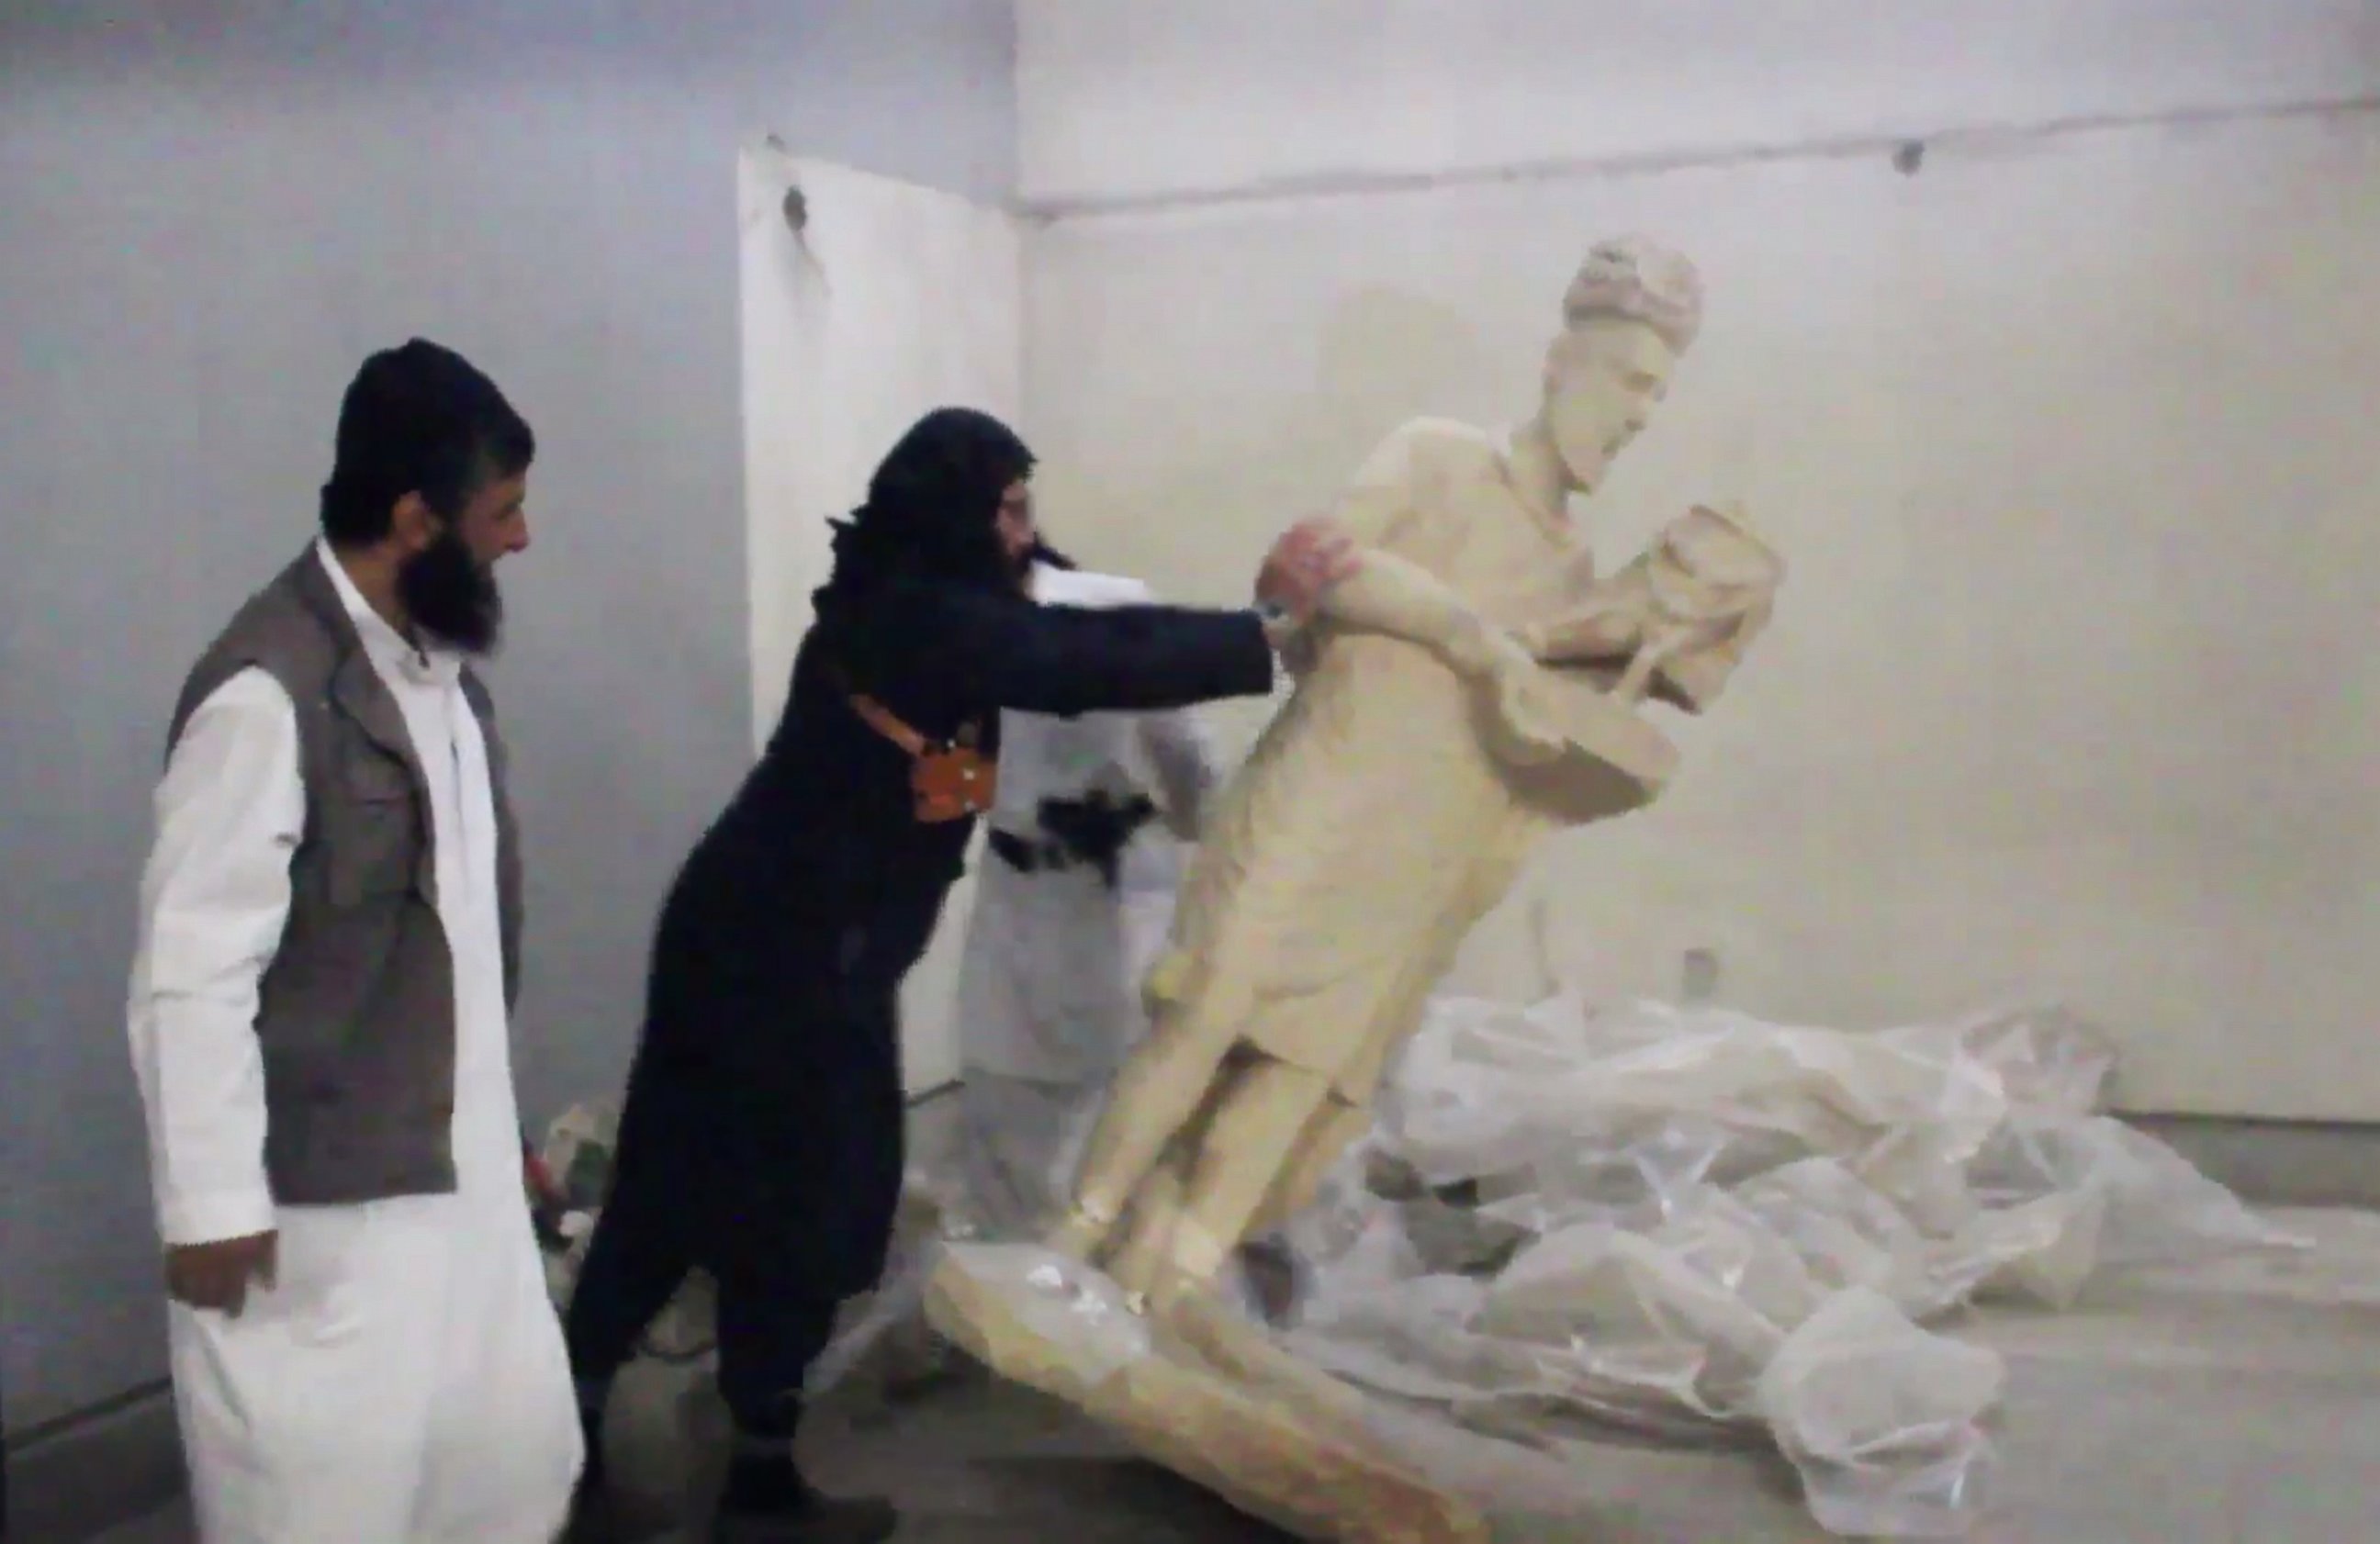 PHOTO: A militant topples an ancient artifact in the Ninevah Museum in Mosul, Iraq, in this screengrab from a video posted on a social media account affiliated with the Islamic State group on Feb. 26, 2015.